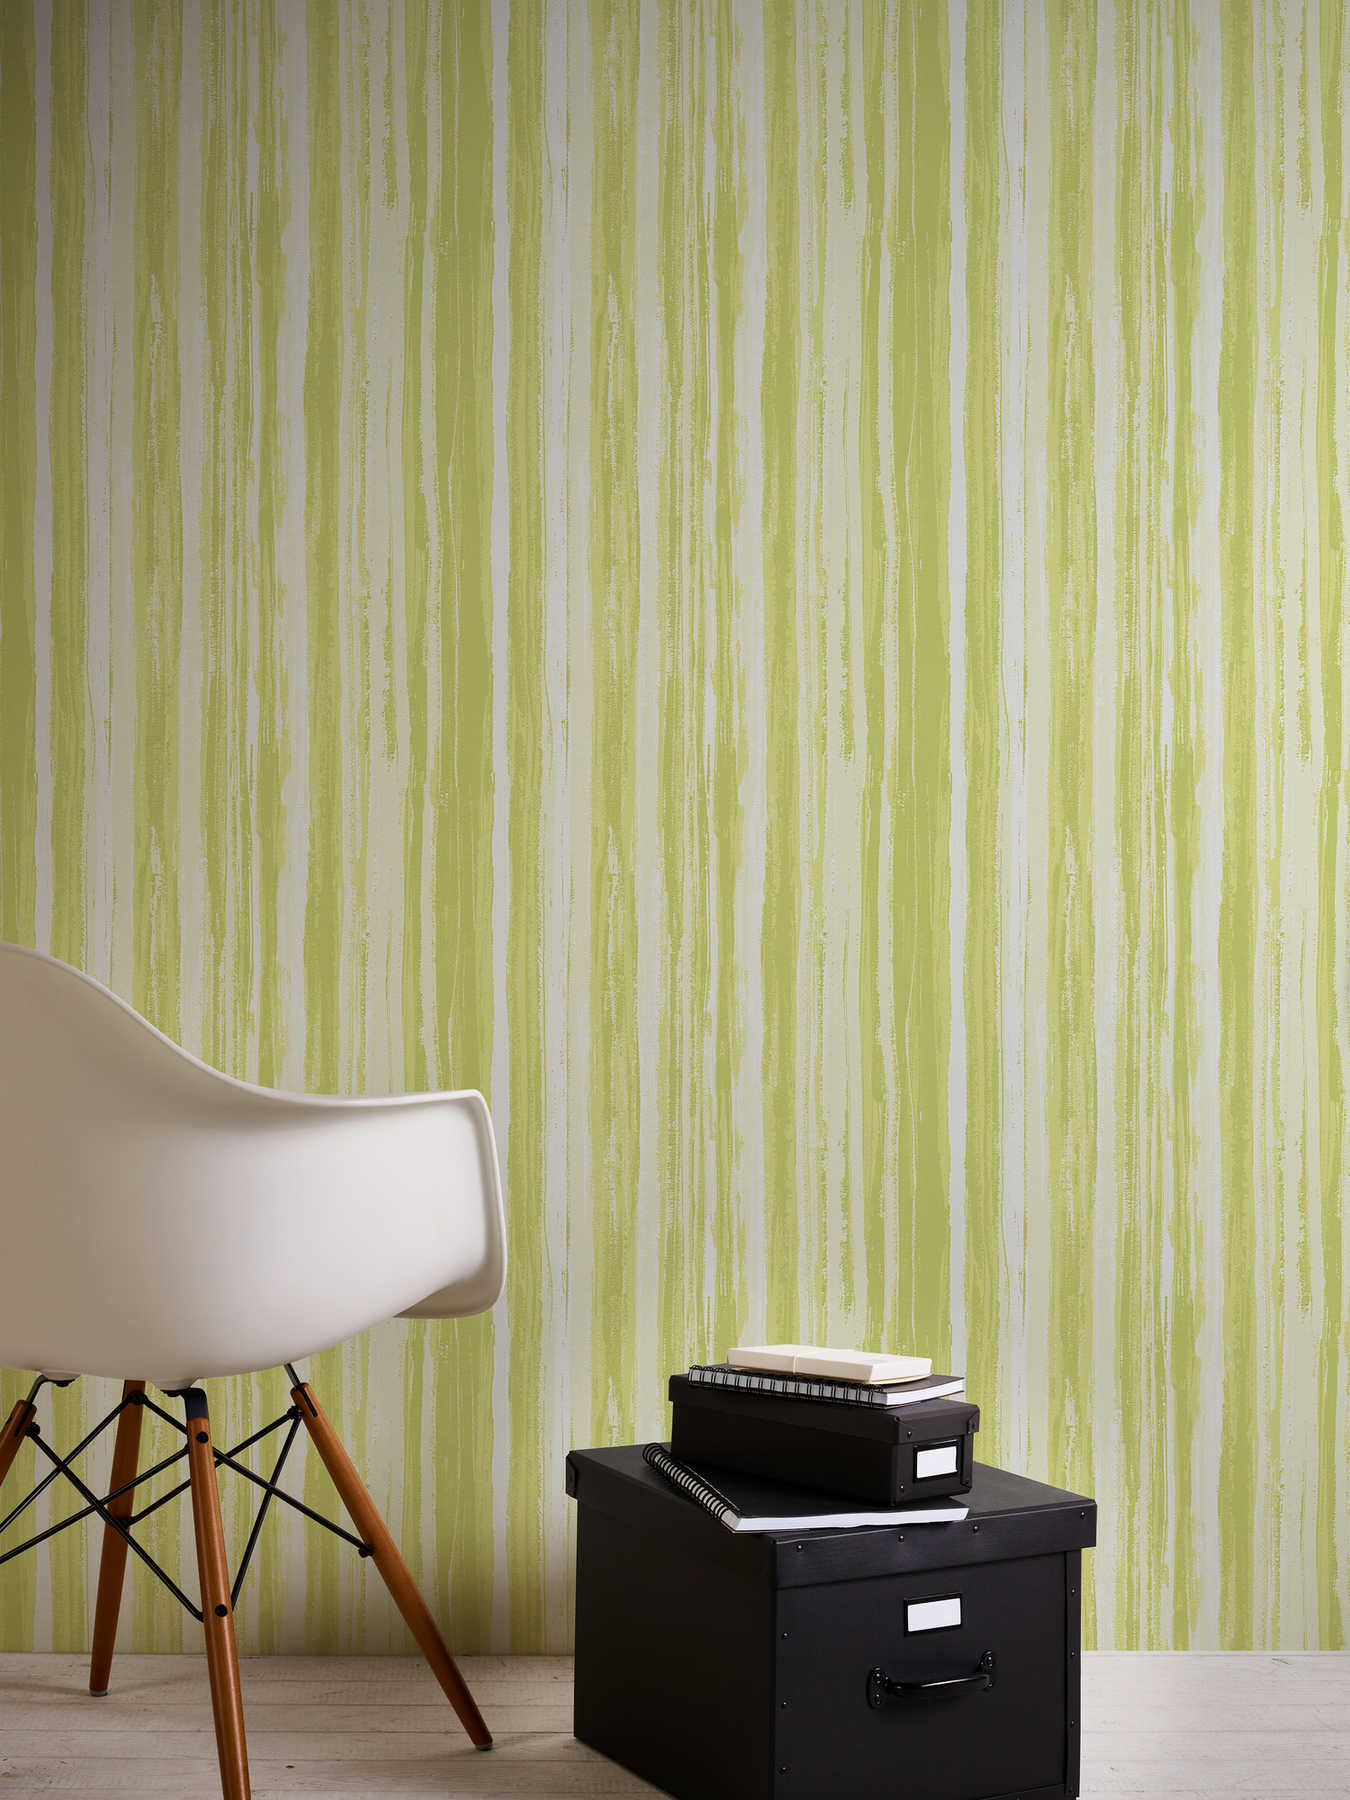             Green wallpaper with natural line pattern - green, white
        